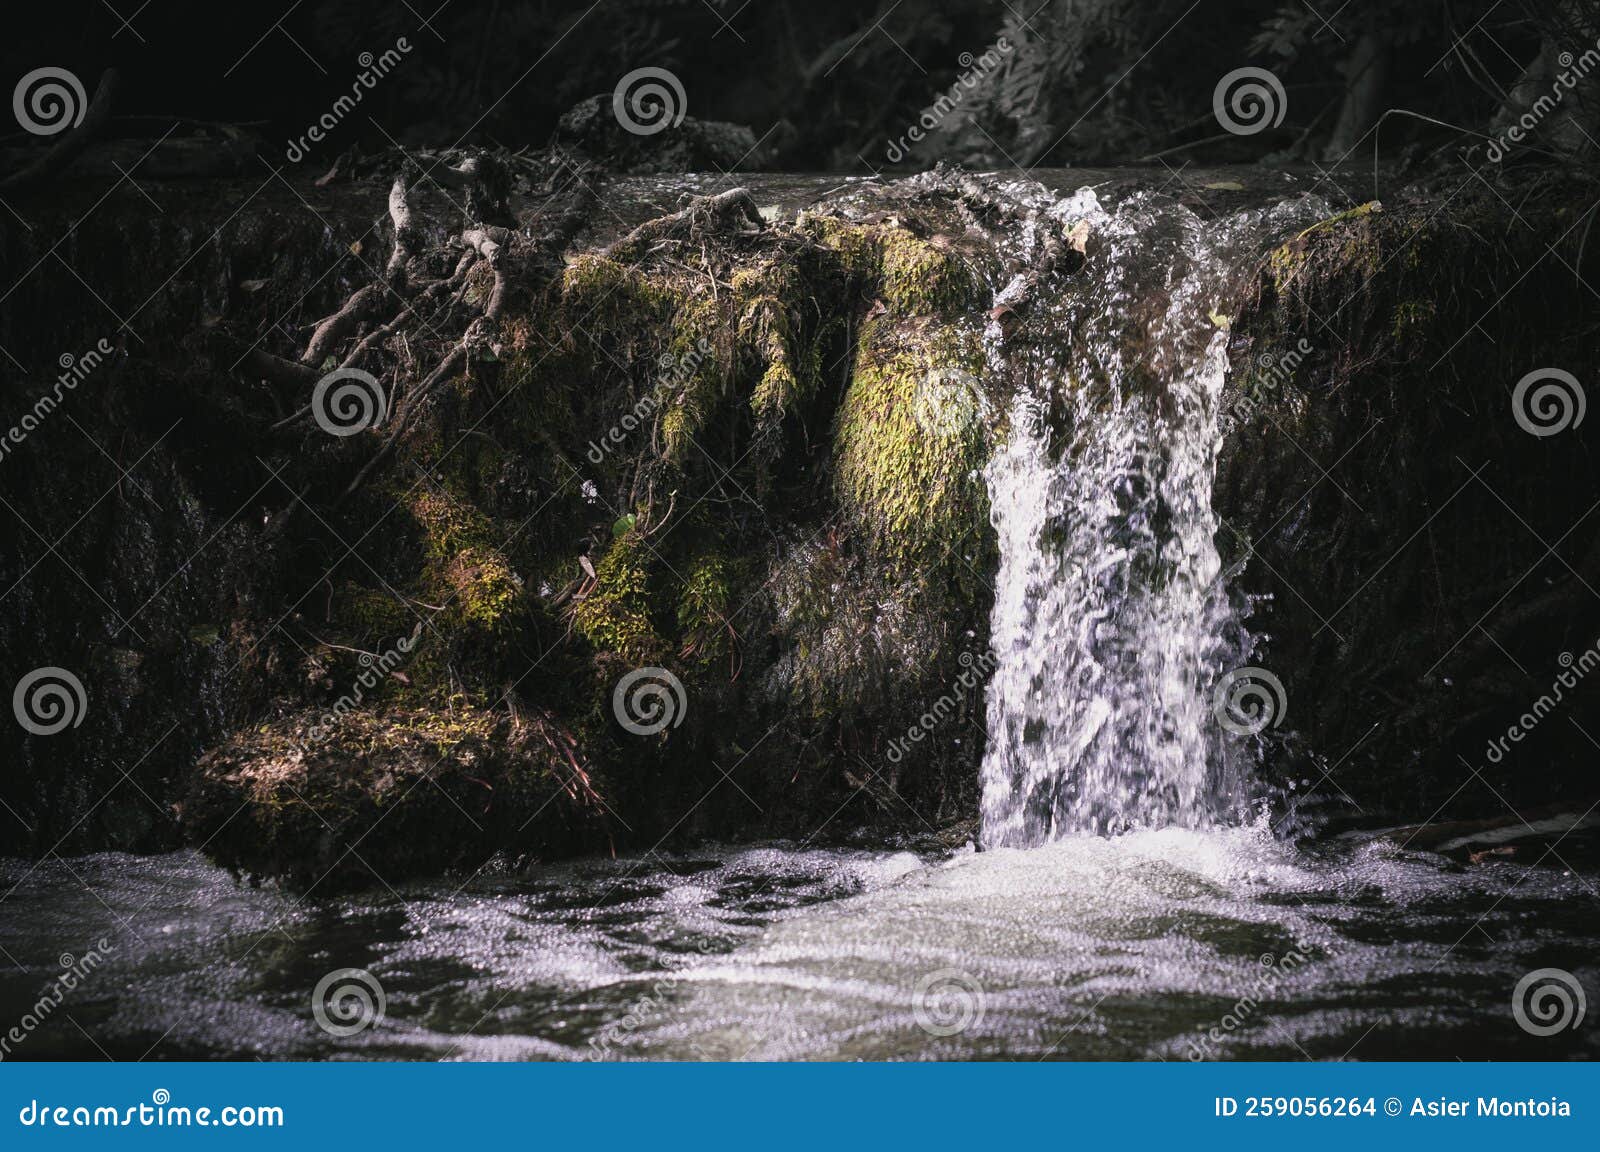 small waterfall in a river.